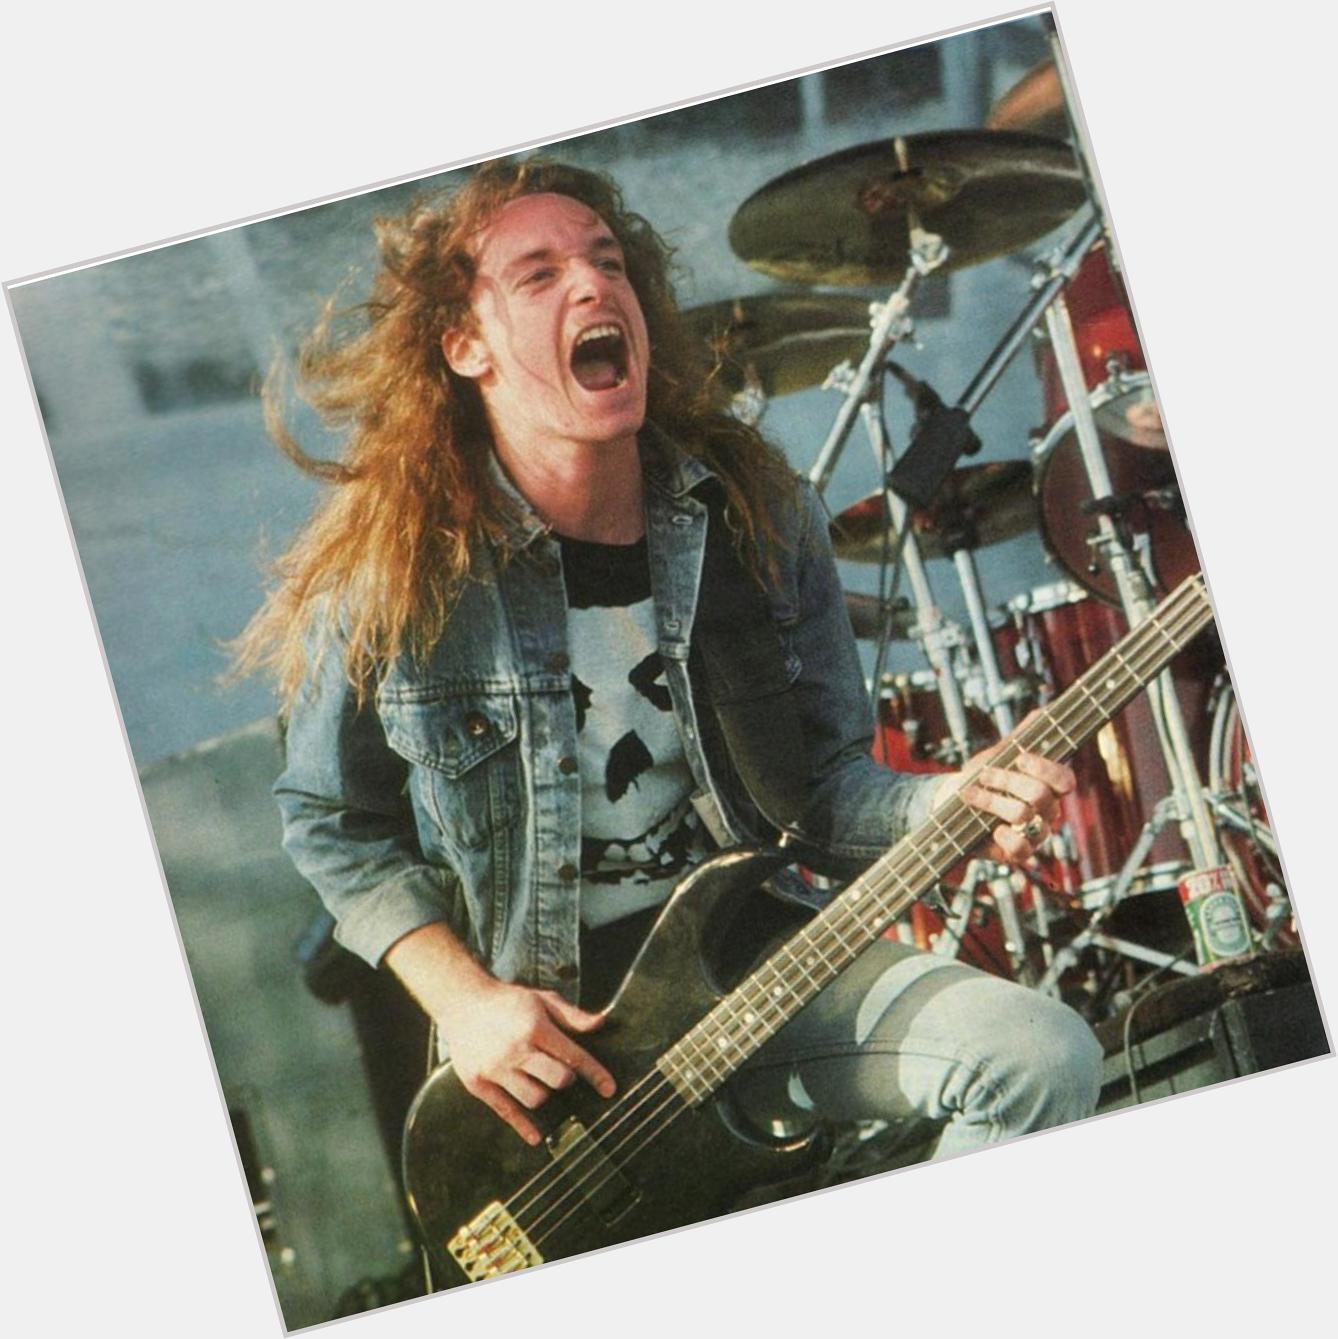 Happy birthday to one of the greatest bassists of all time. Cliff Burton of Metallica 